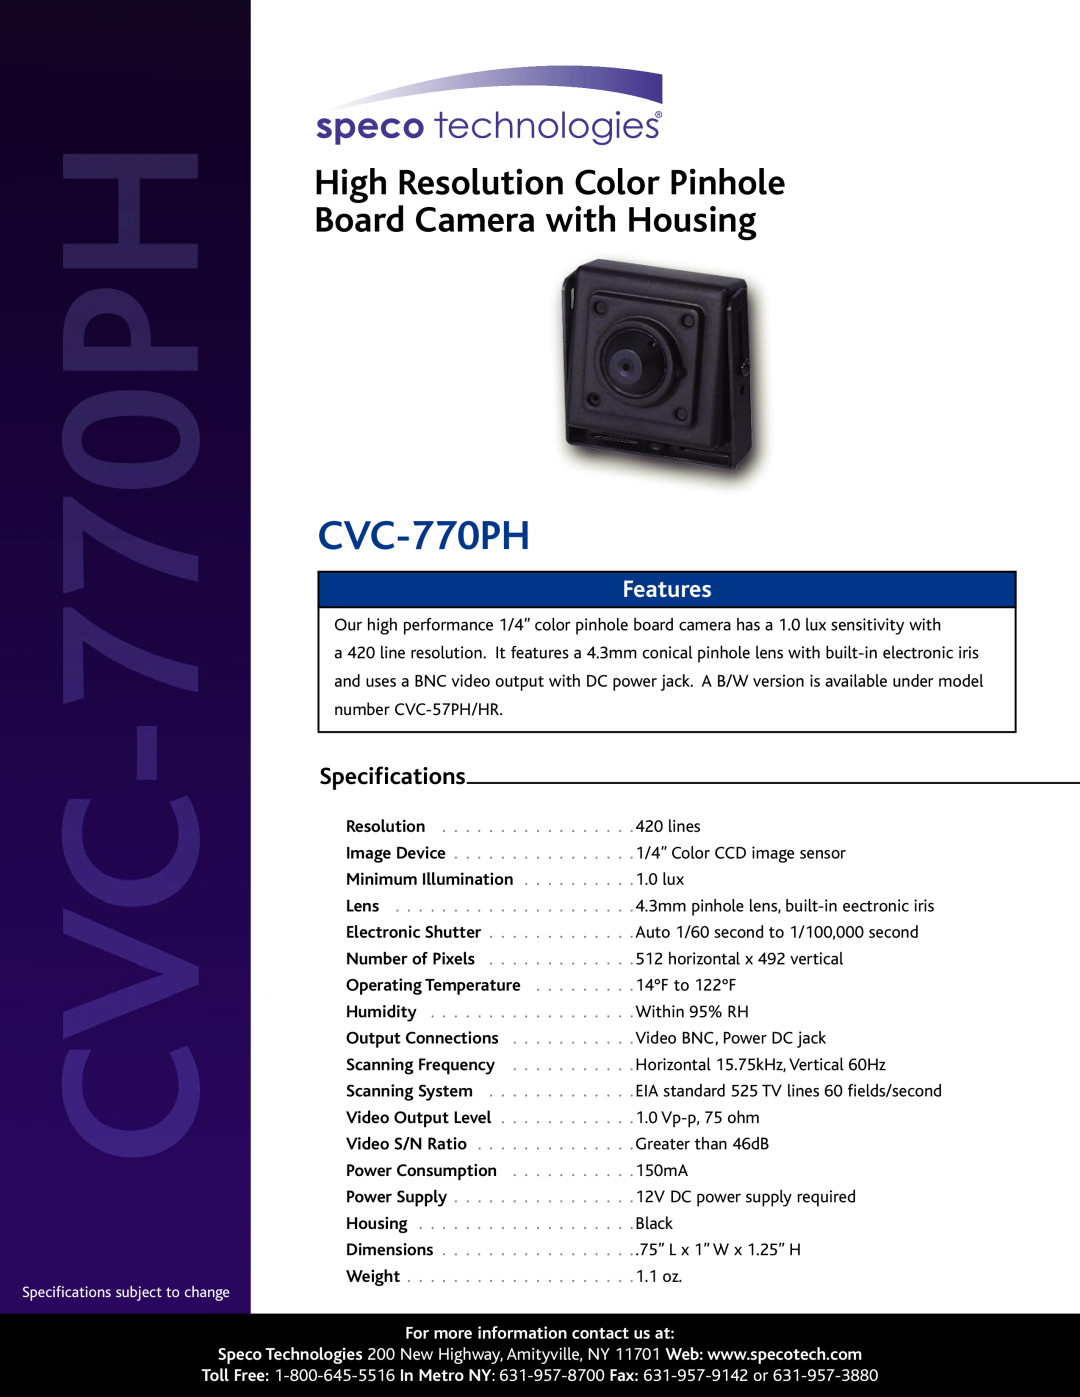 Speco Technologies CVC-770PH specifications High Resolution Color Pinhole Board Camera with Housing, Features 